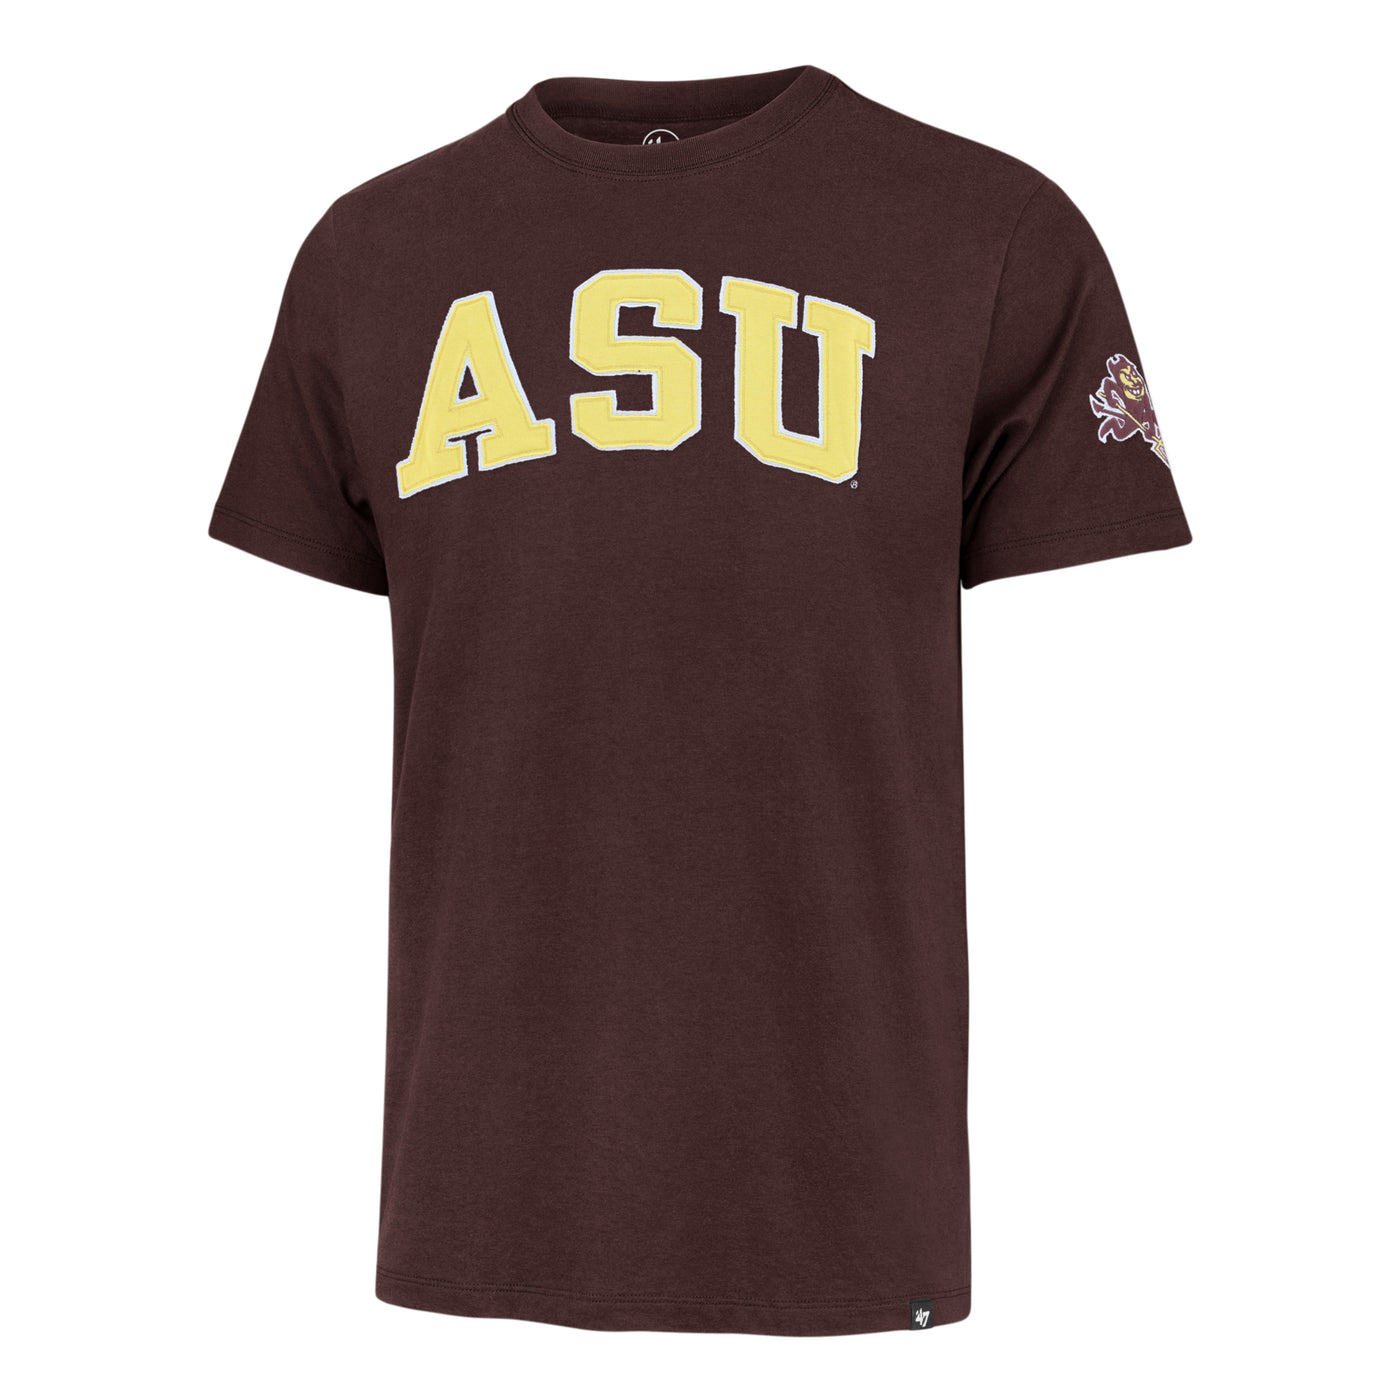 ASU maroon shirt with gold ASU patch on the chest. Features another small sparky patch on the sleeve. 